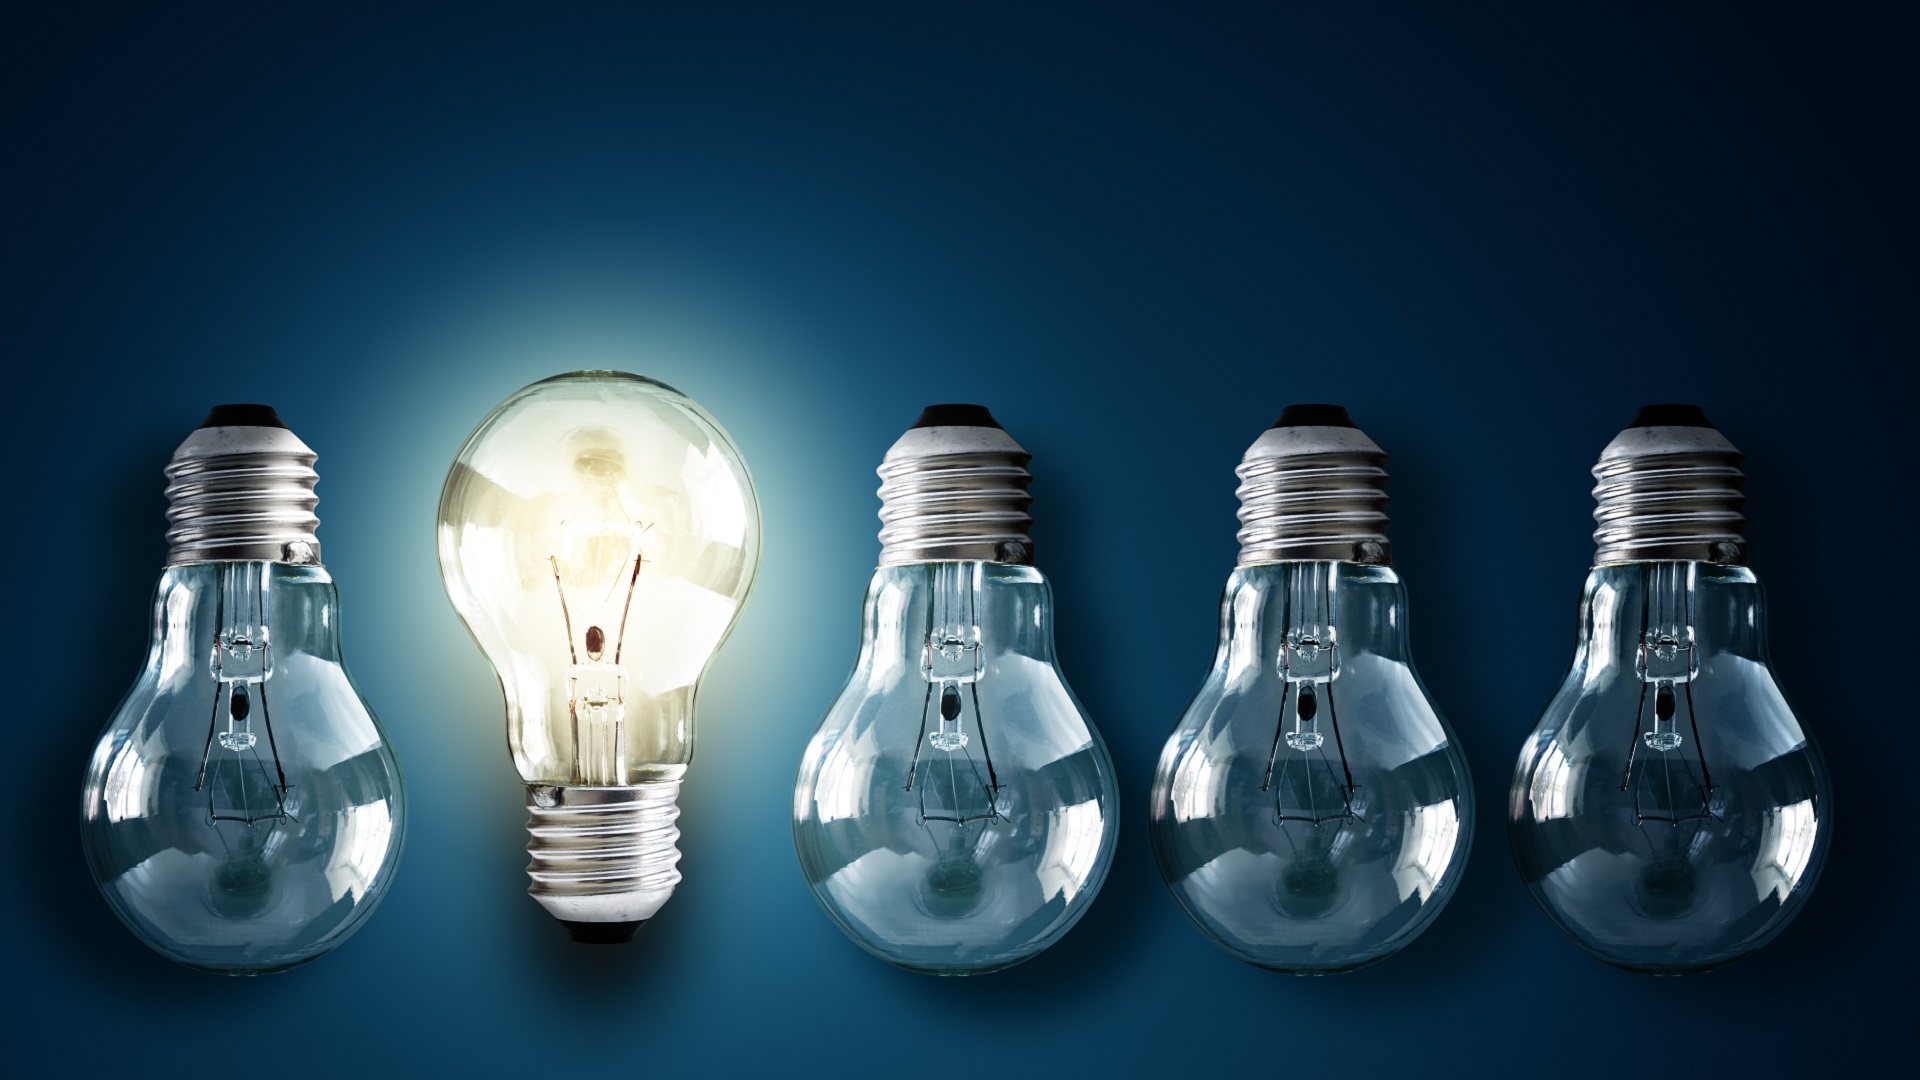 5 lightbulbs, 1 lit, representing multiple PLM tools for bright ideas and innovation